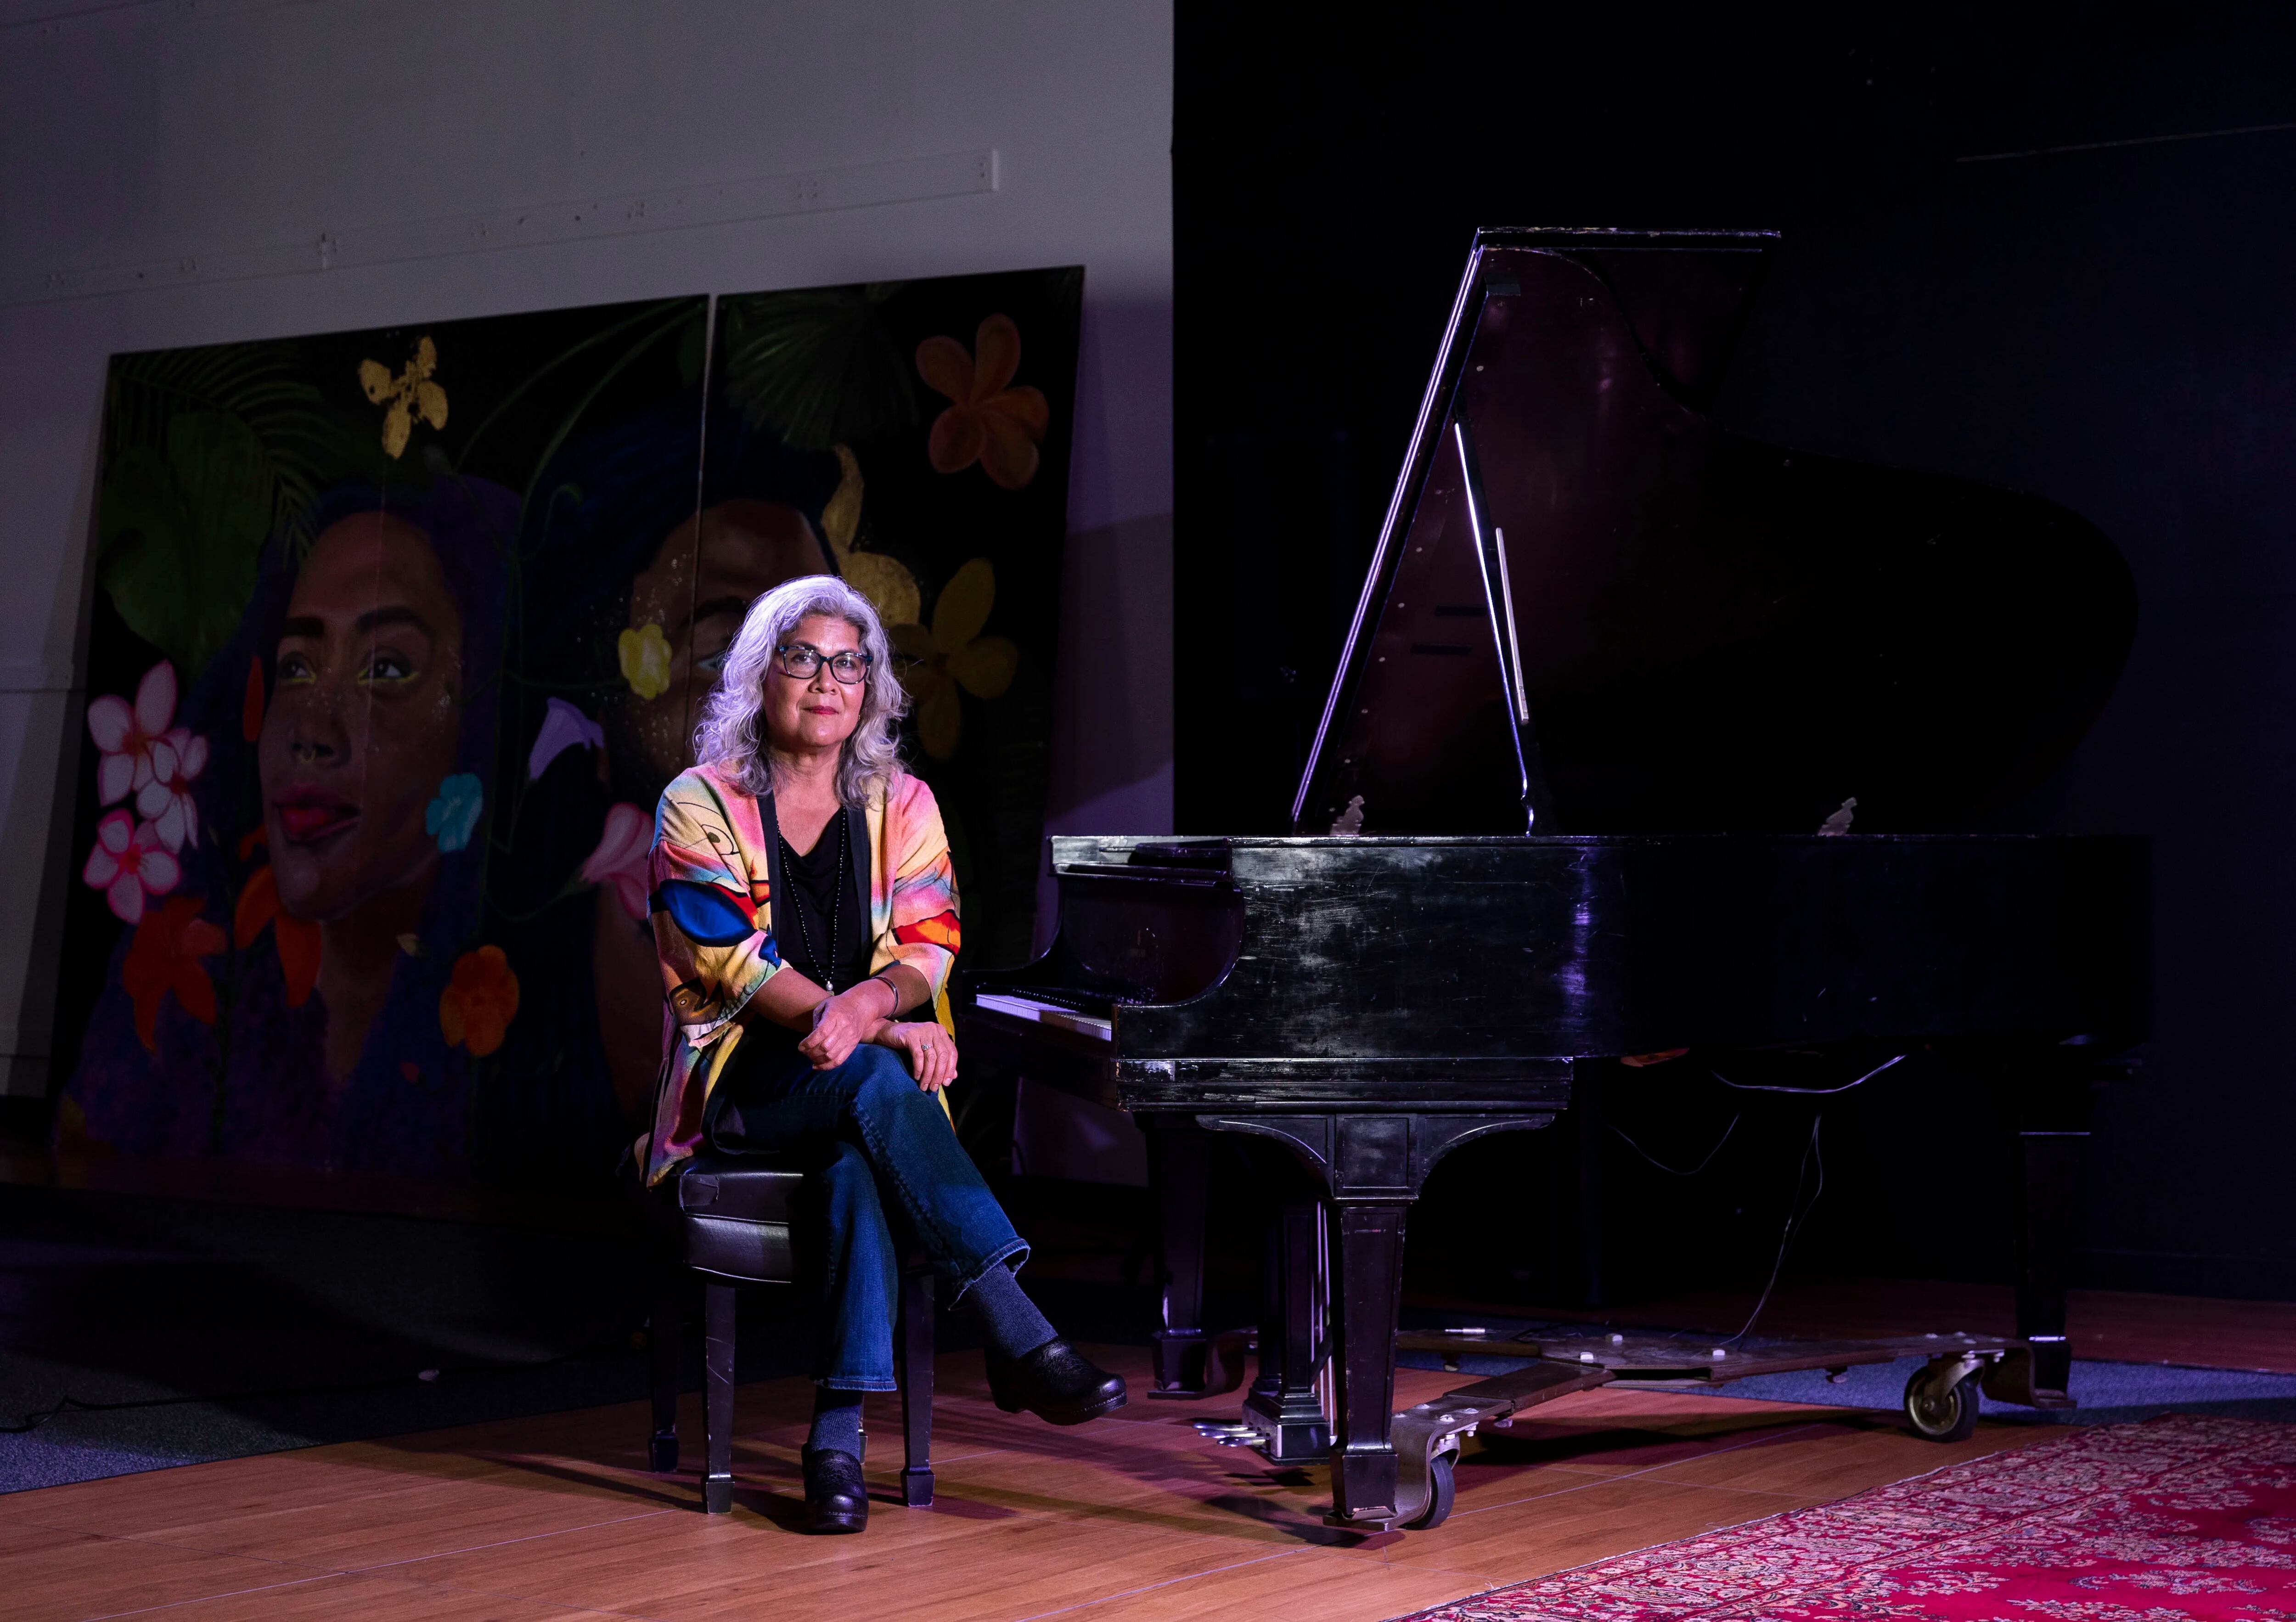 Pianist Sumi Tonooka poses for a portrait at the Painted Bride Art Center in Philadelphia on Monday, Oct. 23, 2023. Tonooka’s Alchemy Sound Project will perform “Under the Surface” at the Painted Bride Art Center on Nov. 12.